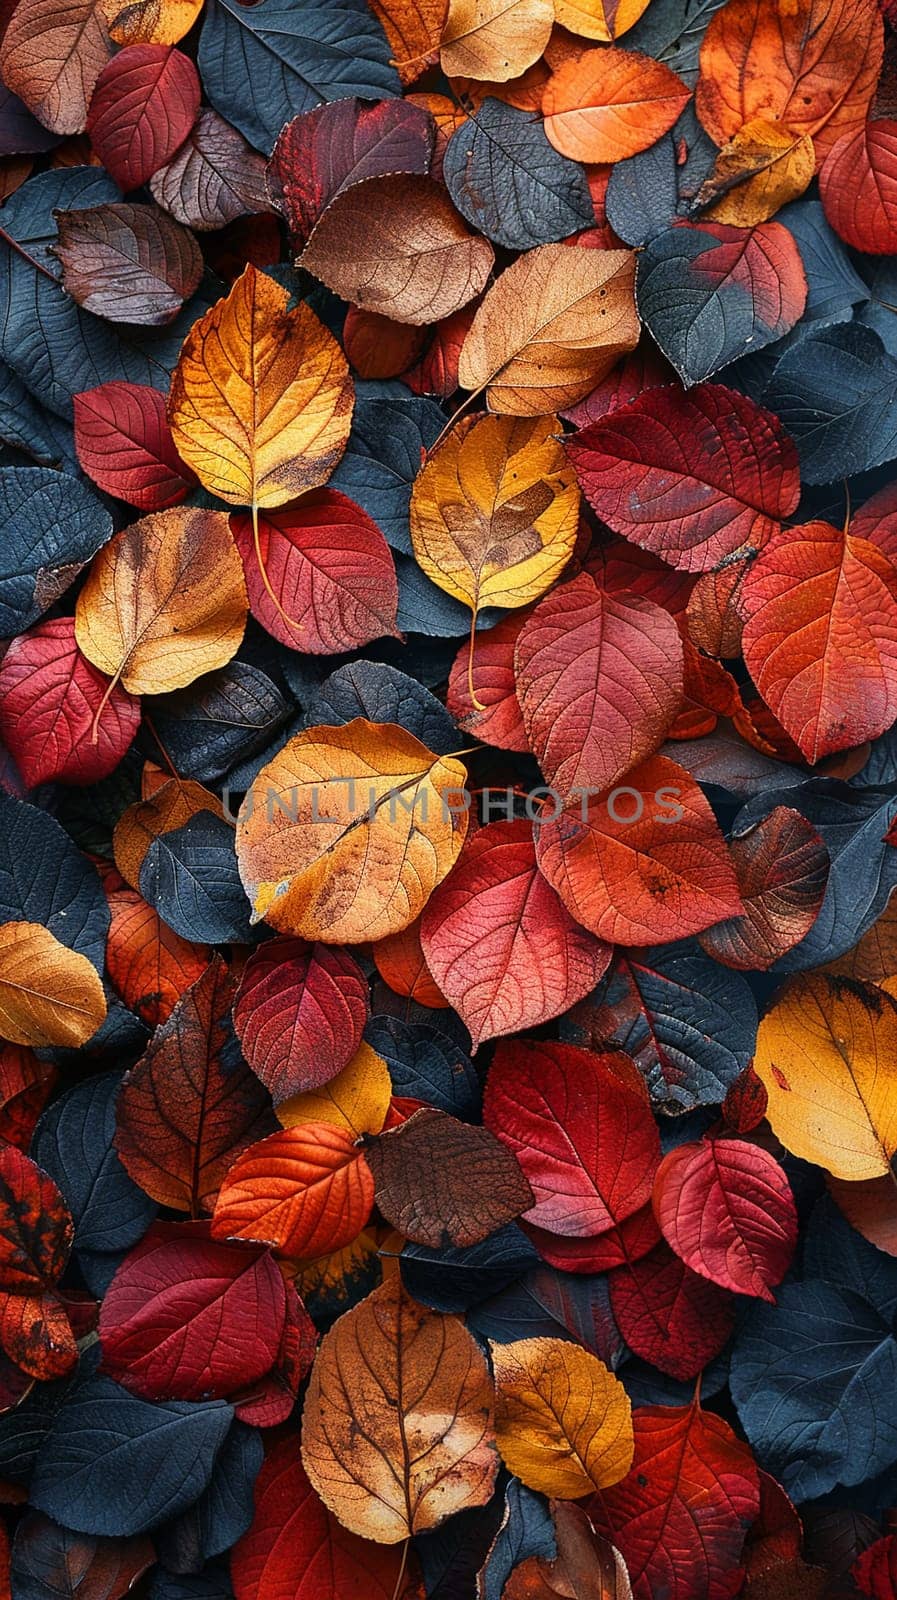 Rustling Leaves on an Autumn Day Colors blurring together by Benzoix